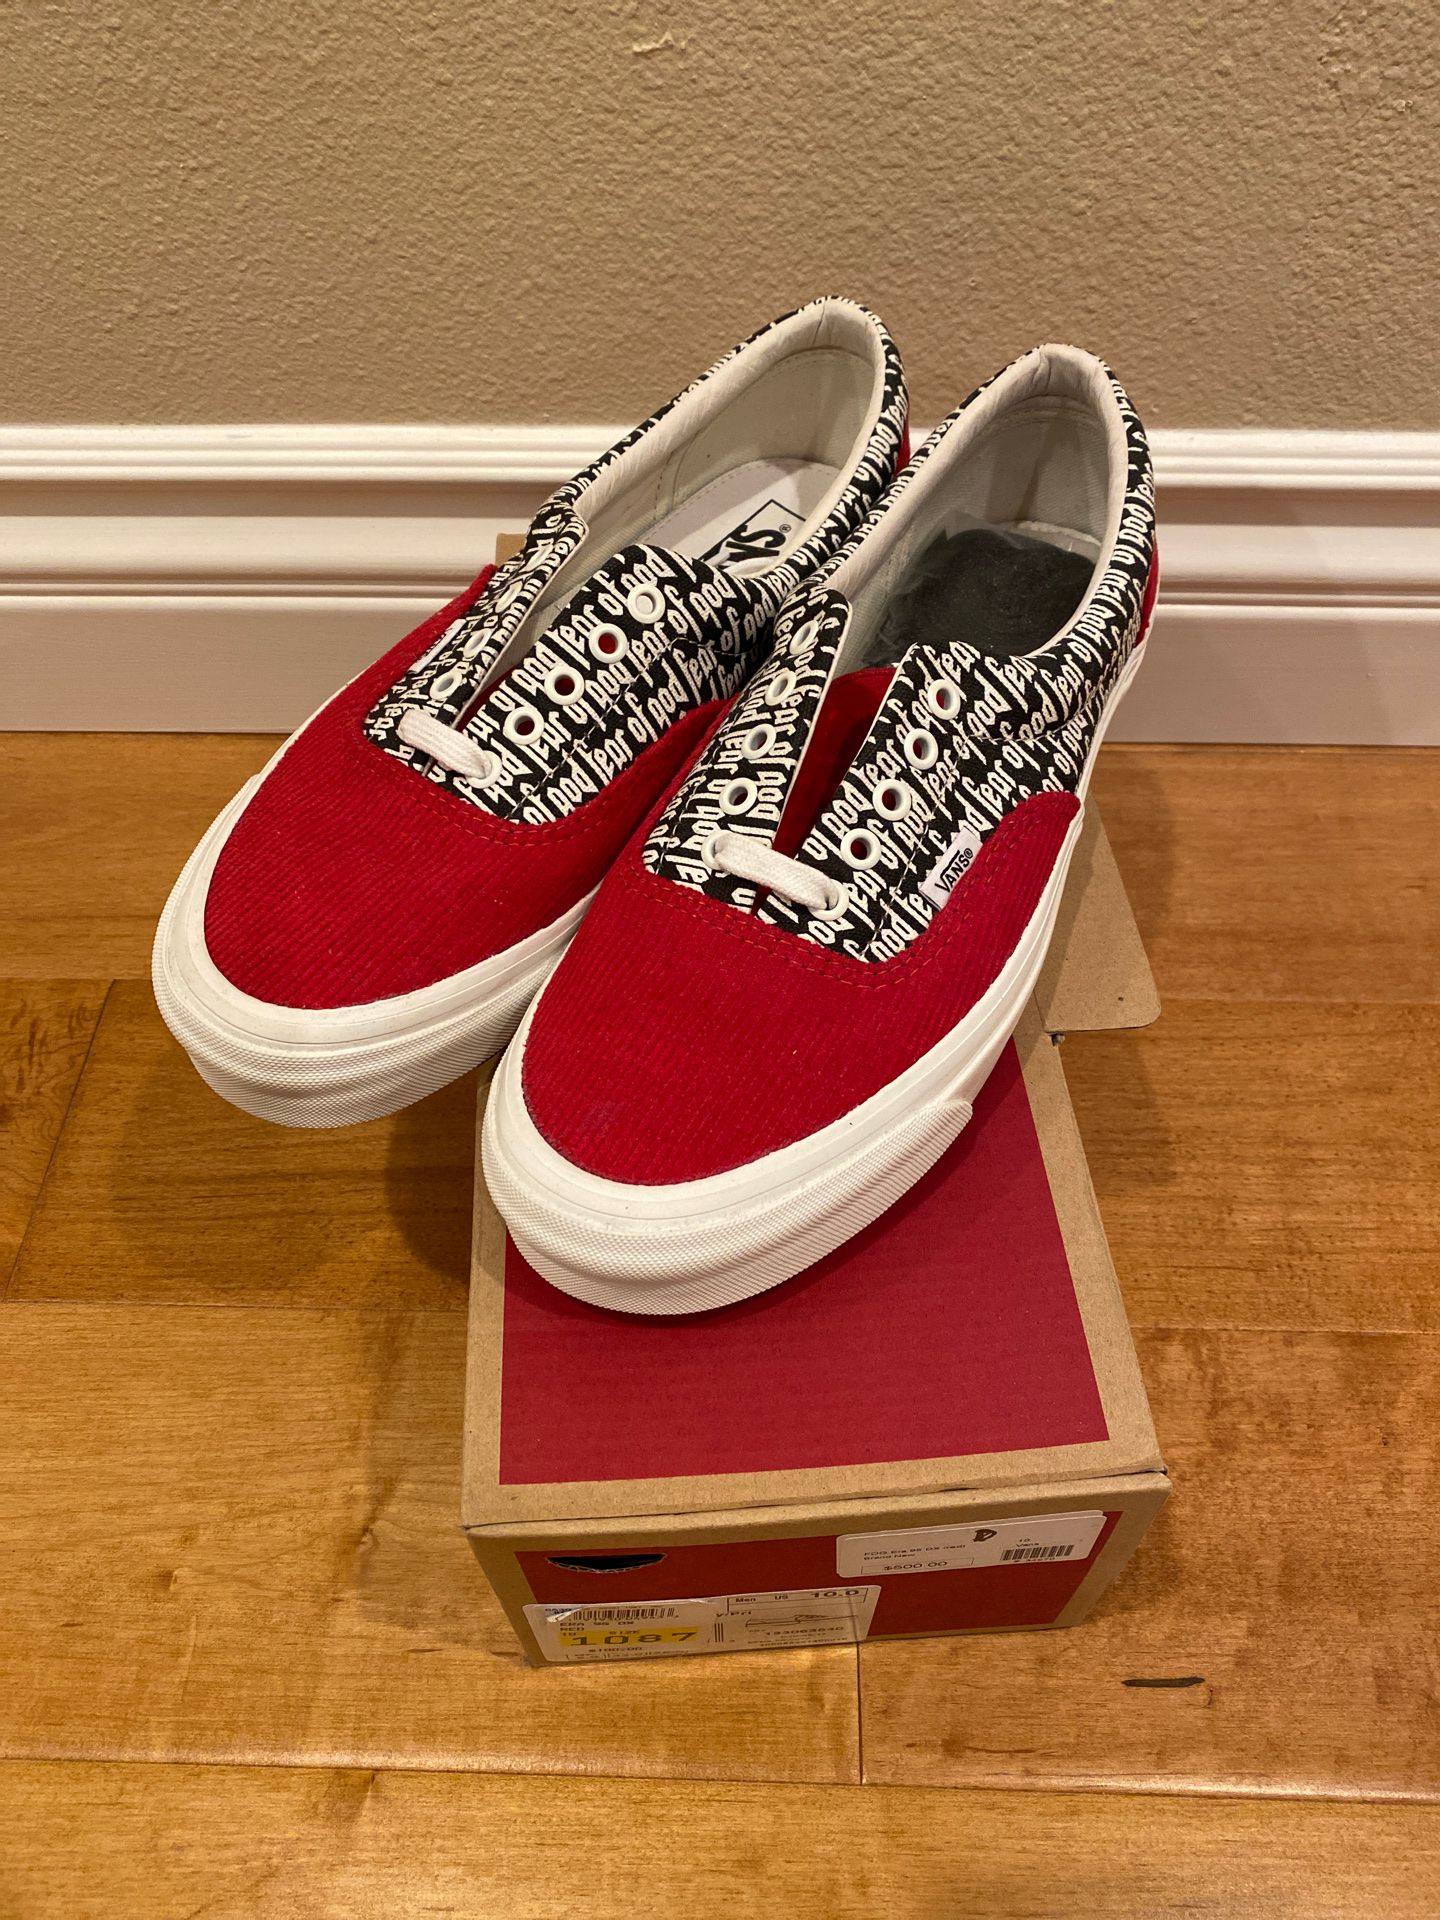 Fear of God Vans red corduroy size 10